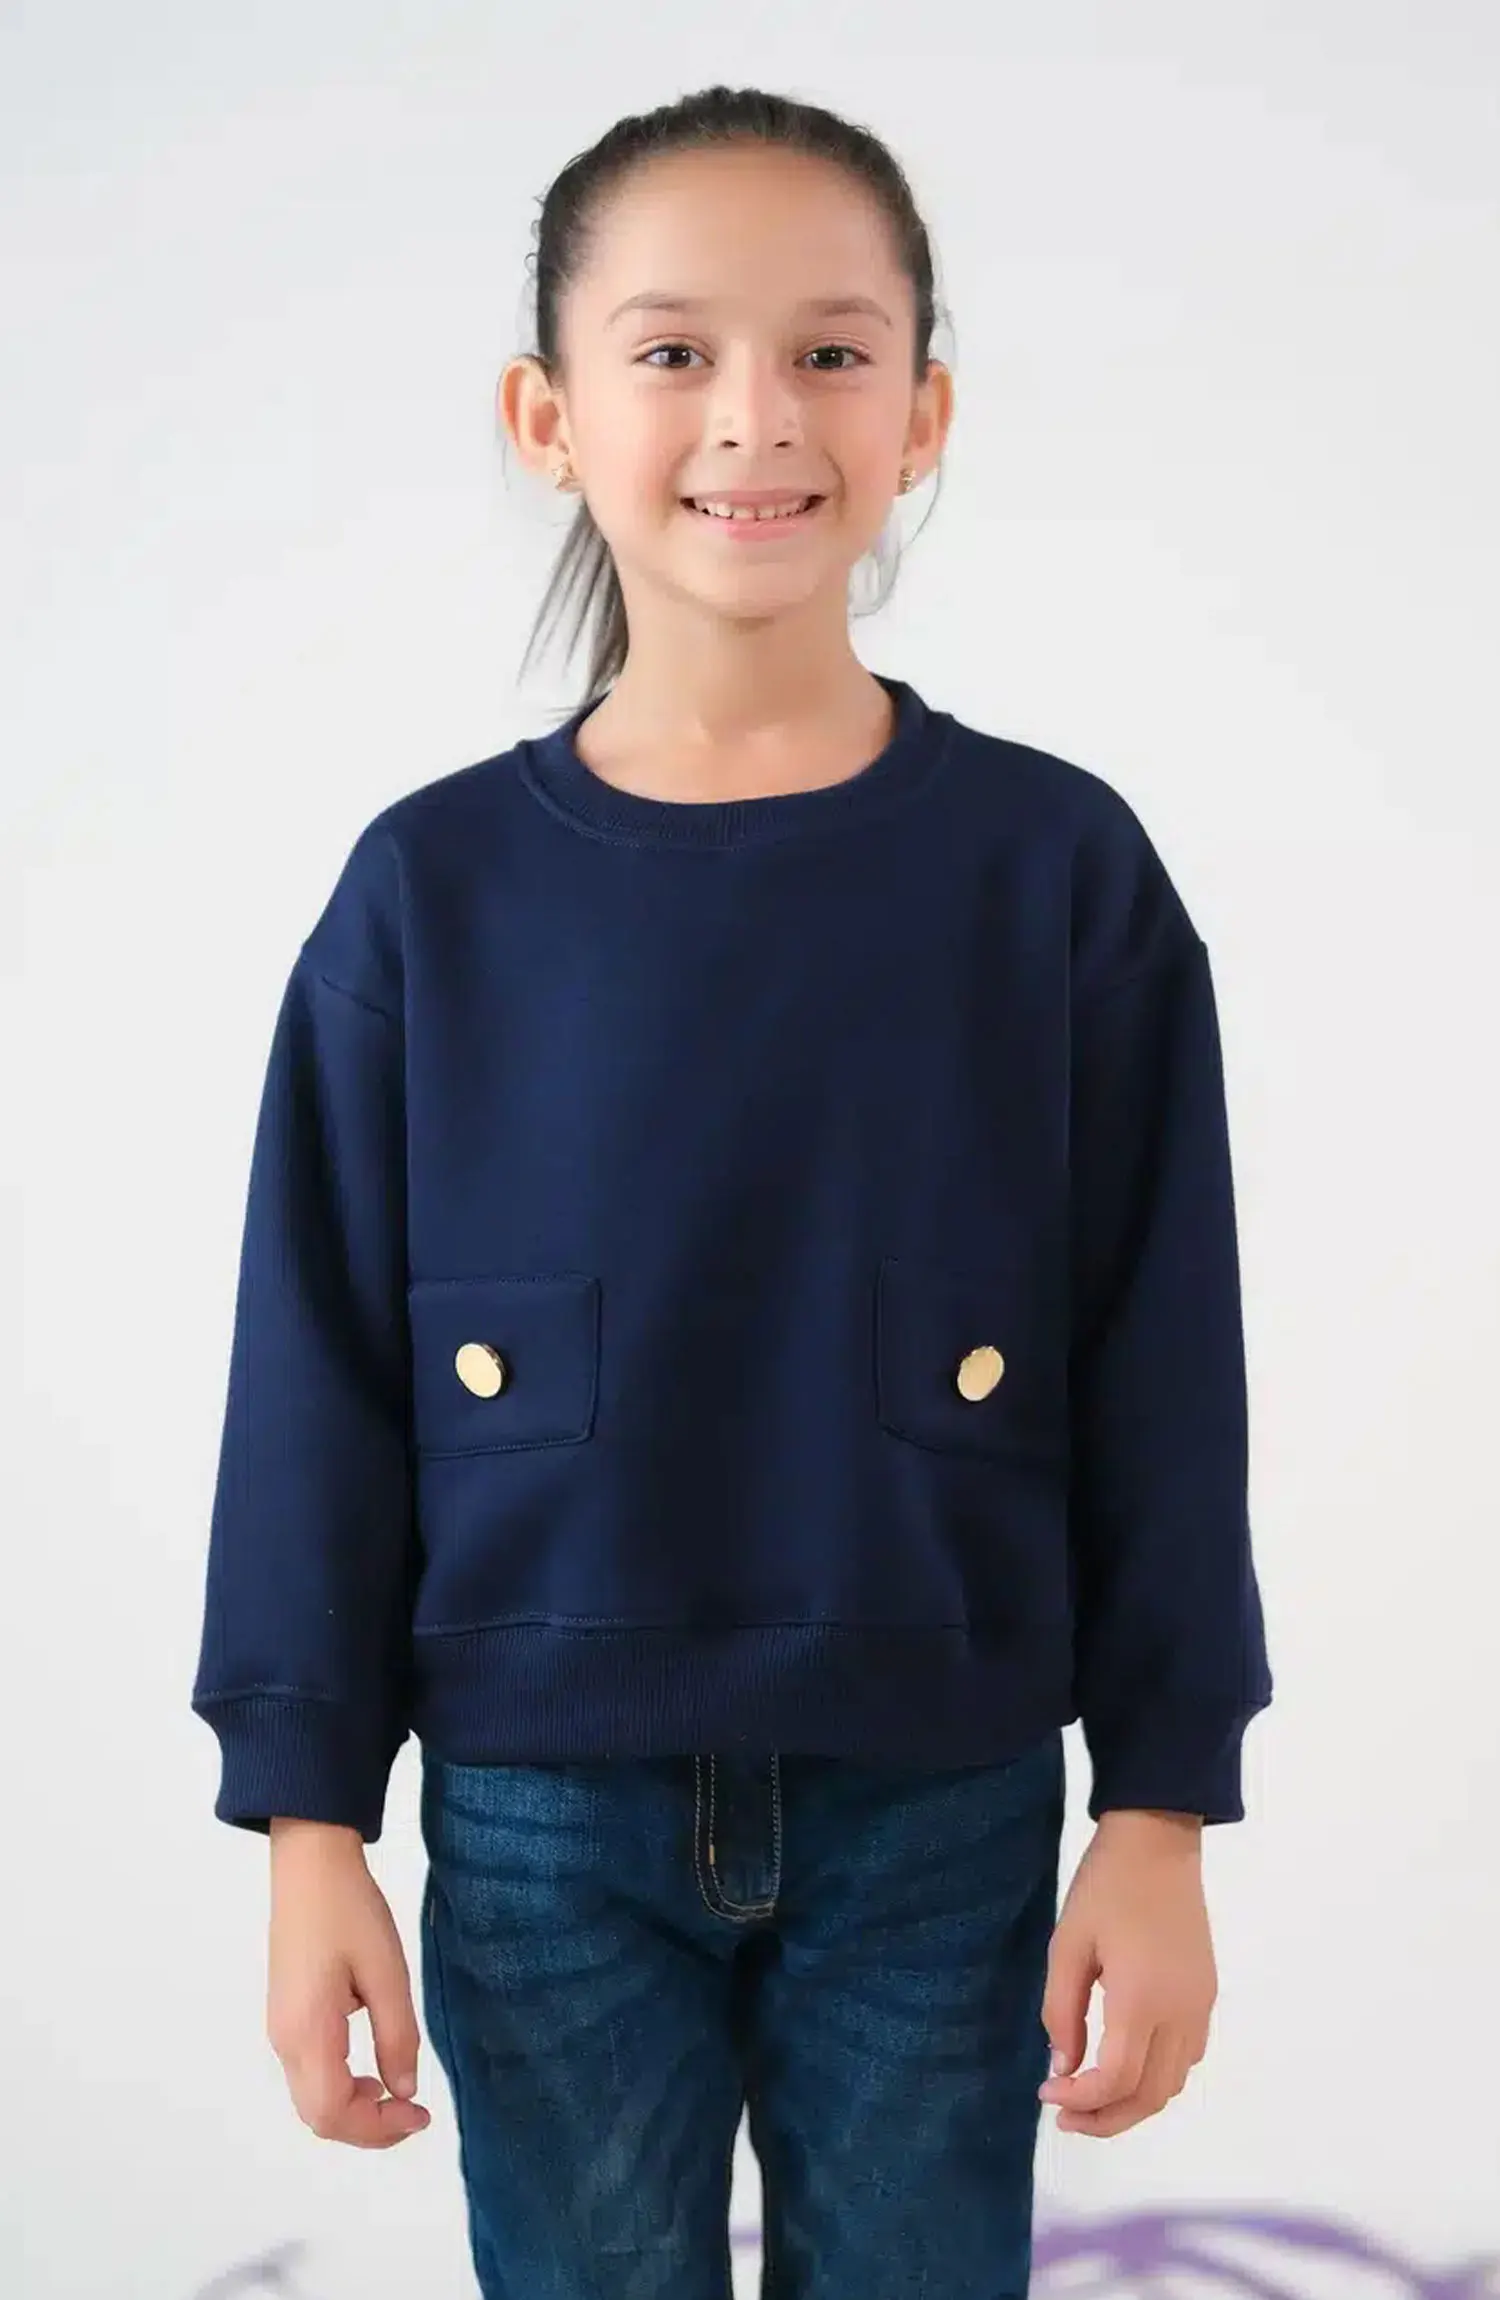 Sprinkles Kids Winter Collection - Sweatshirt With Flap – Navy Blue